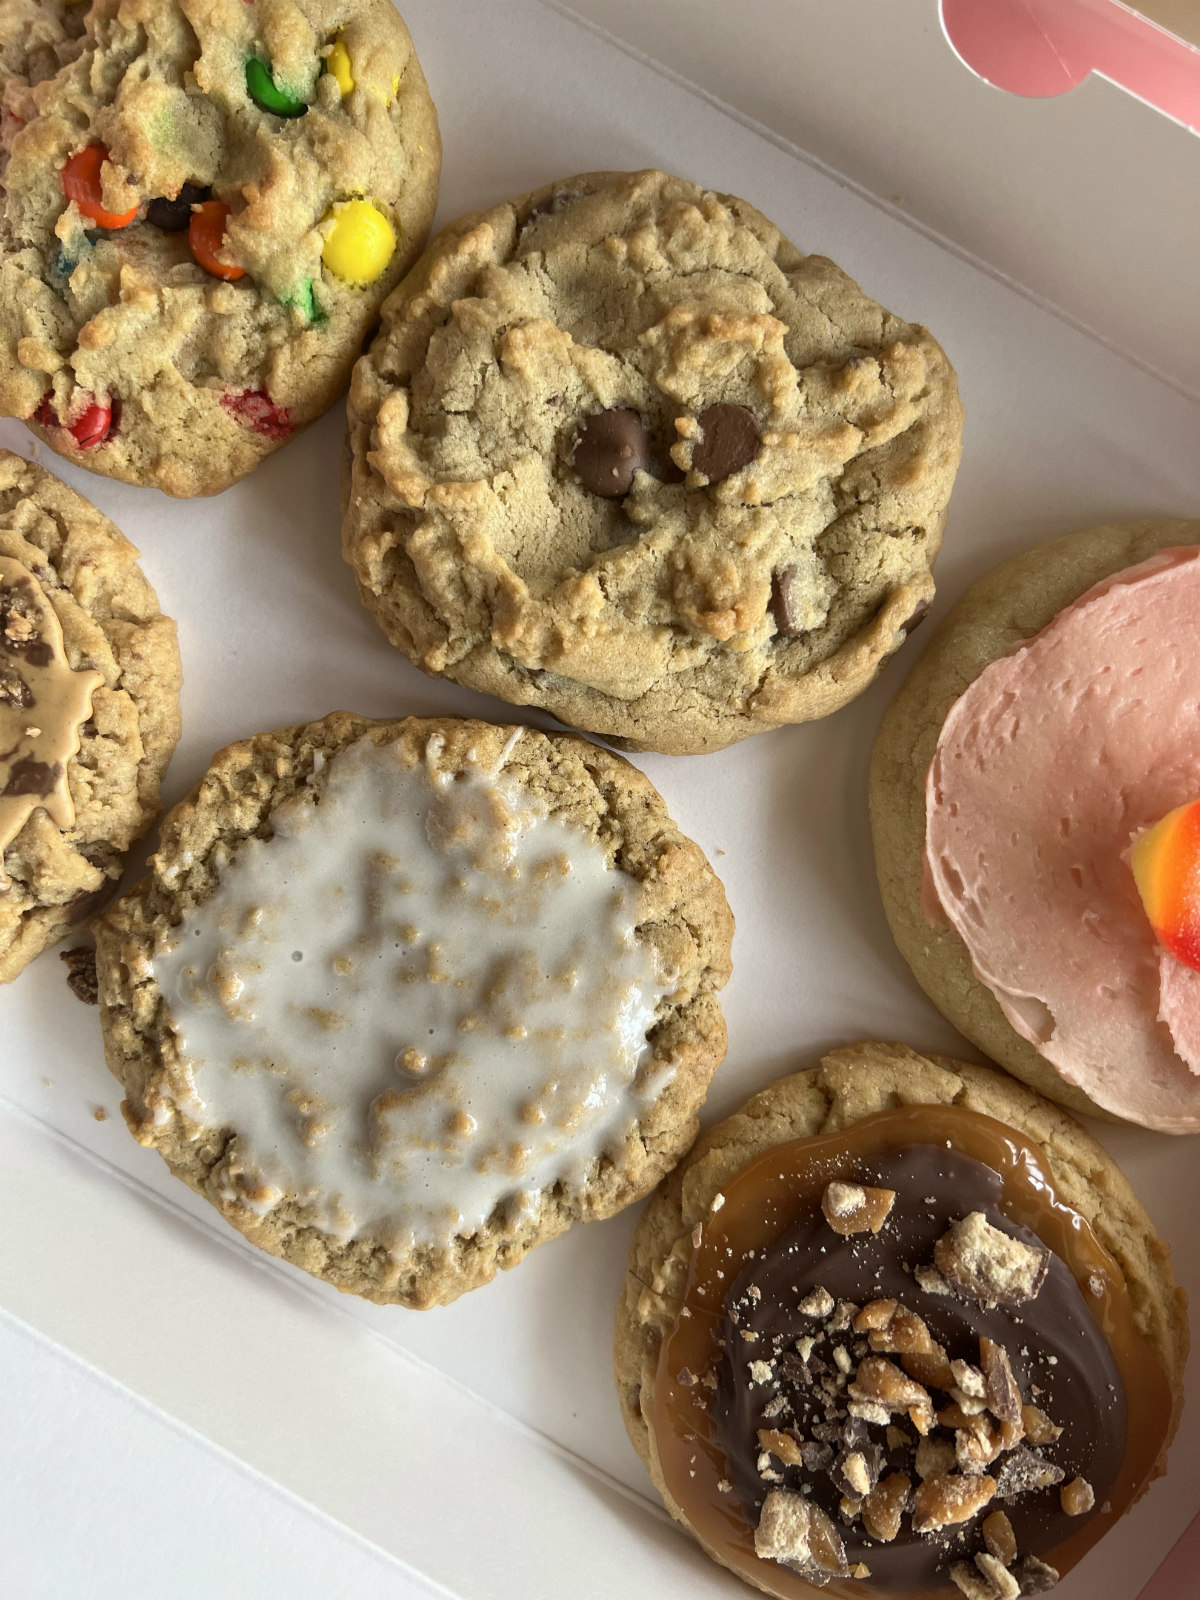 Review: West Omaha’s popular Crumbl Cookies are worth the hype